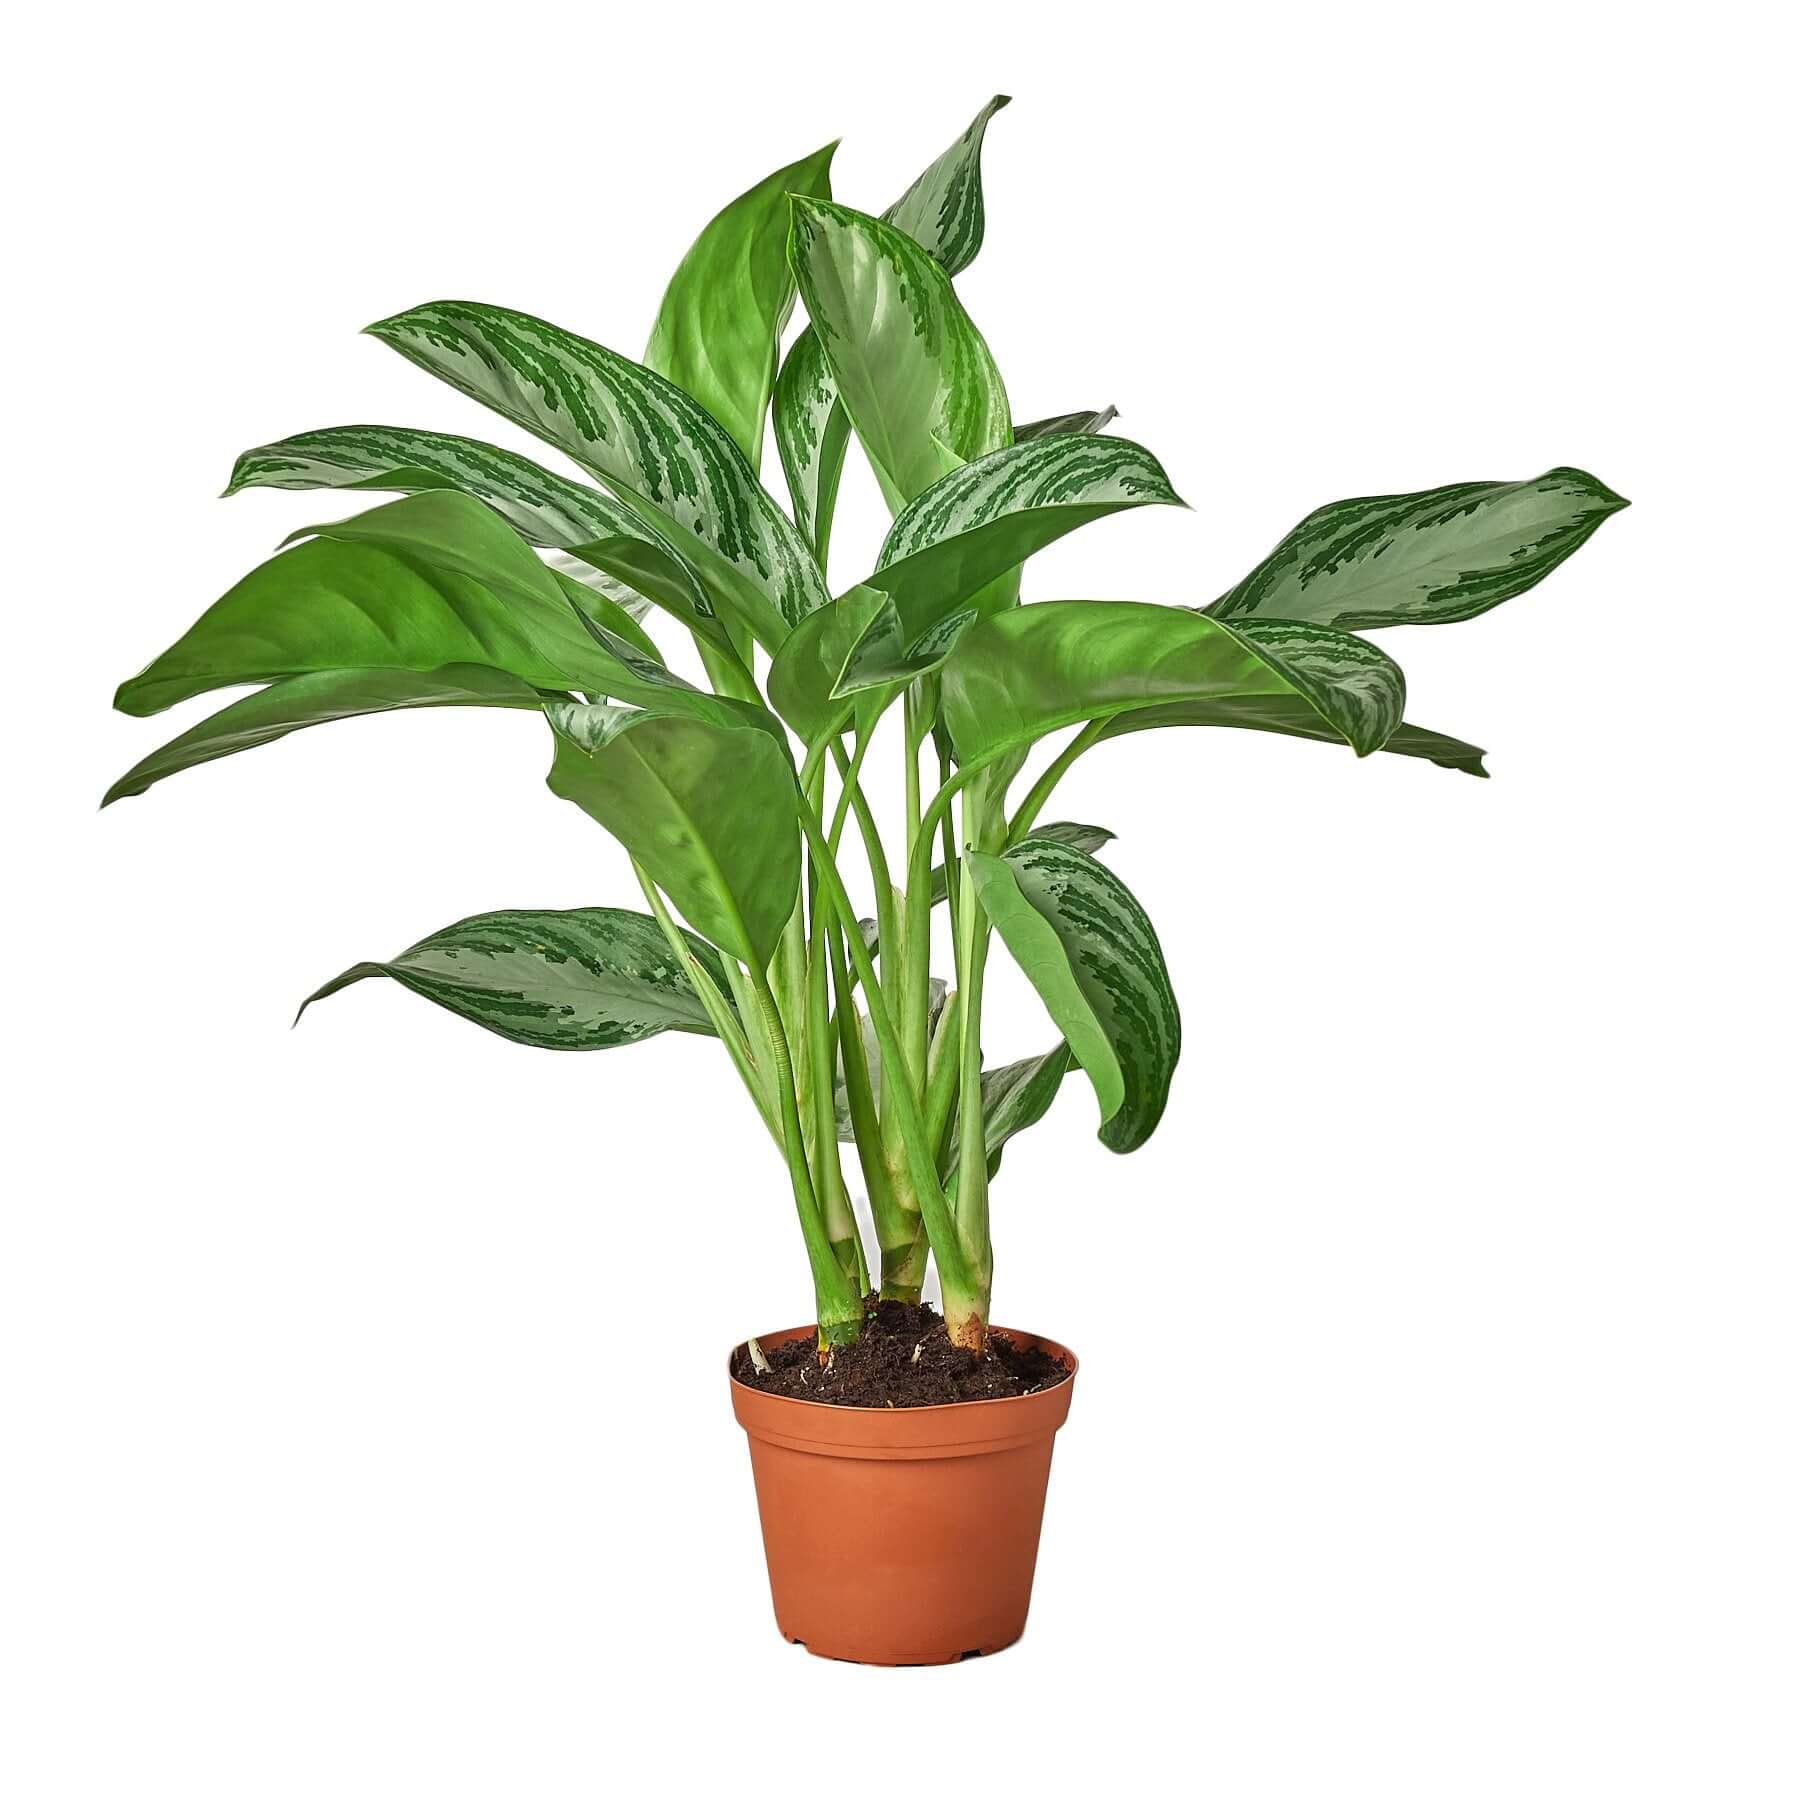 Chinese Evergreen - Silver Bay | Modern house plants that clean the air